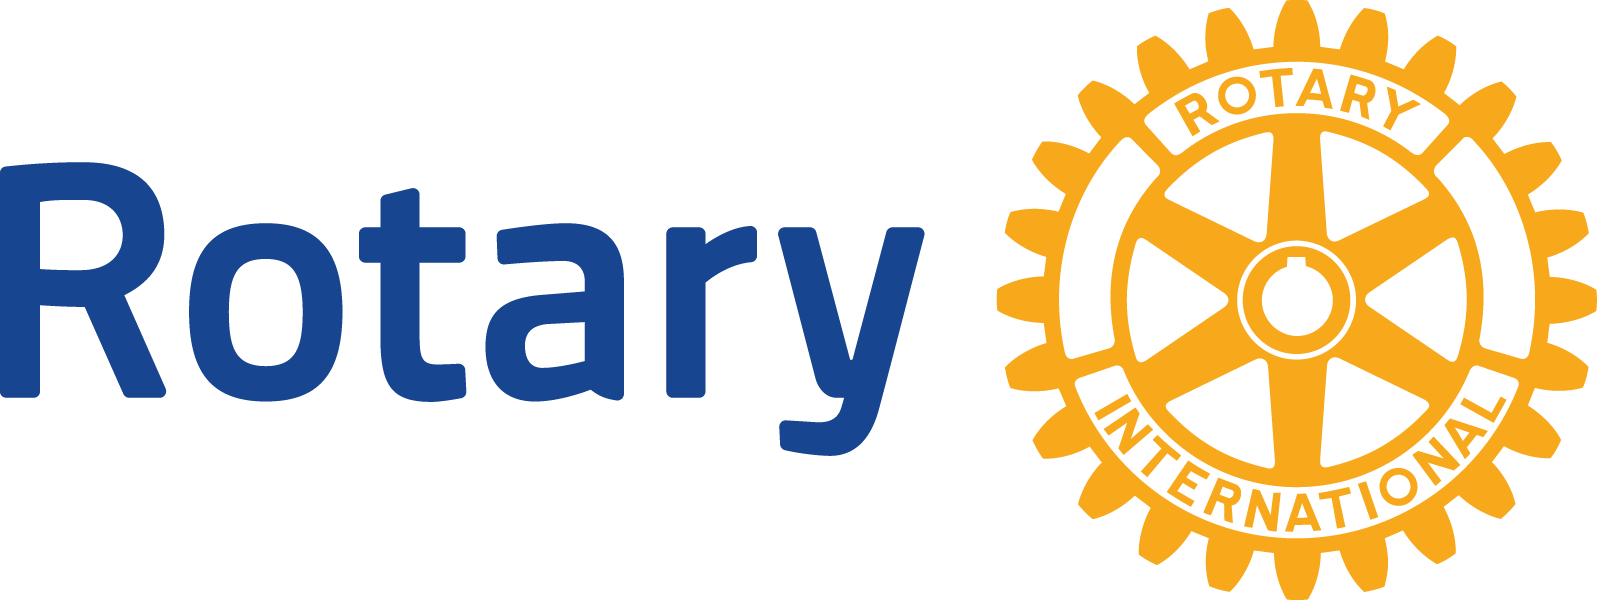 Rotary District 5810